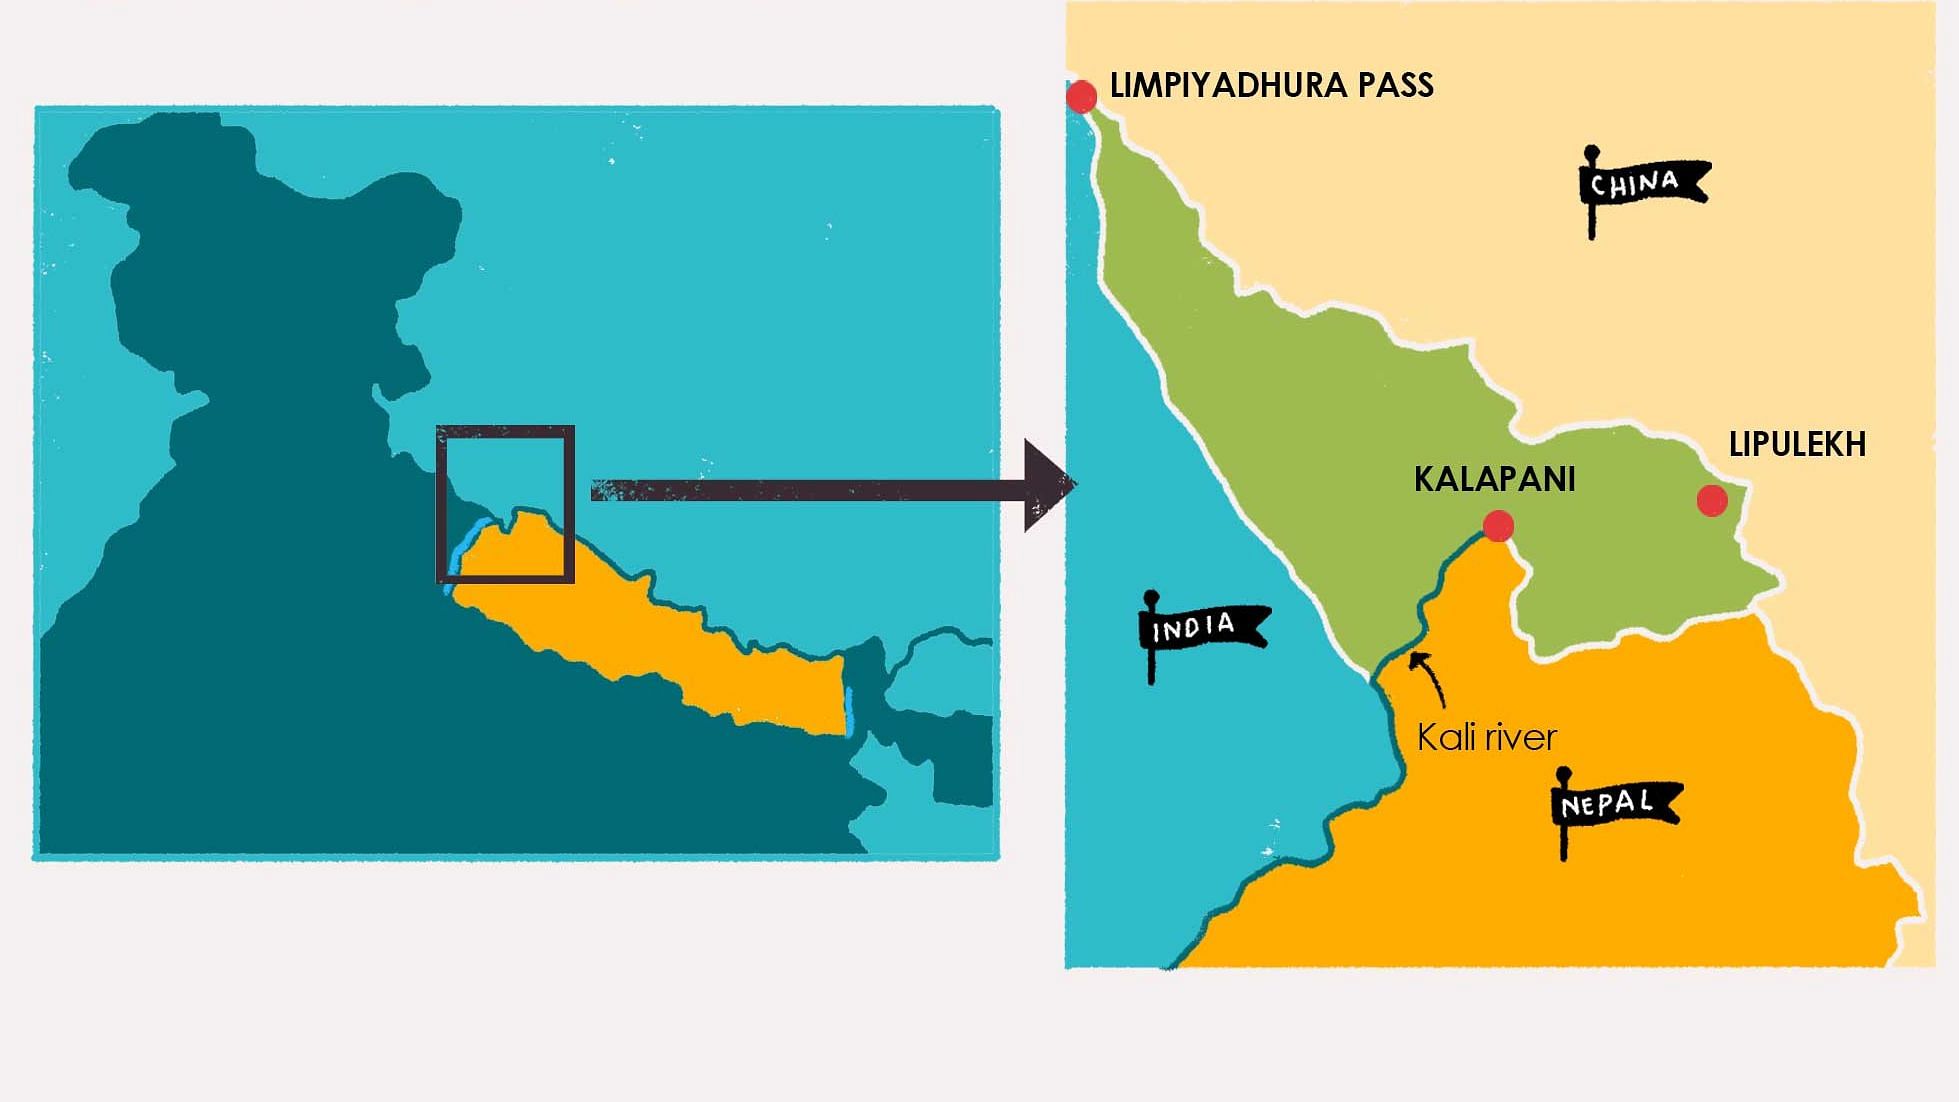 At the root of the border dispute is a 338 square km strip located at the trijunction between India, Nepal, and China and the three areas of interest in this trijunction are Limpiyadhura pass, Lipulekh, and Kalapani.